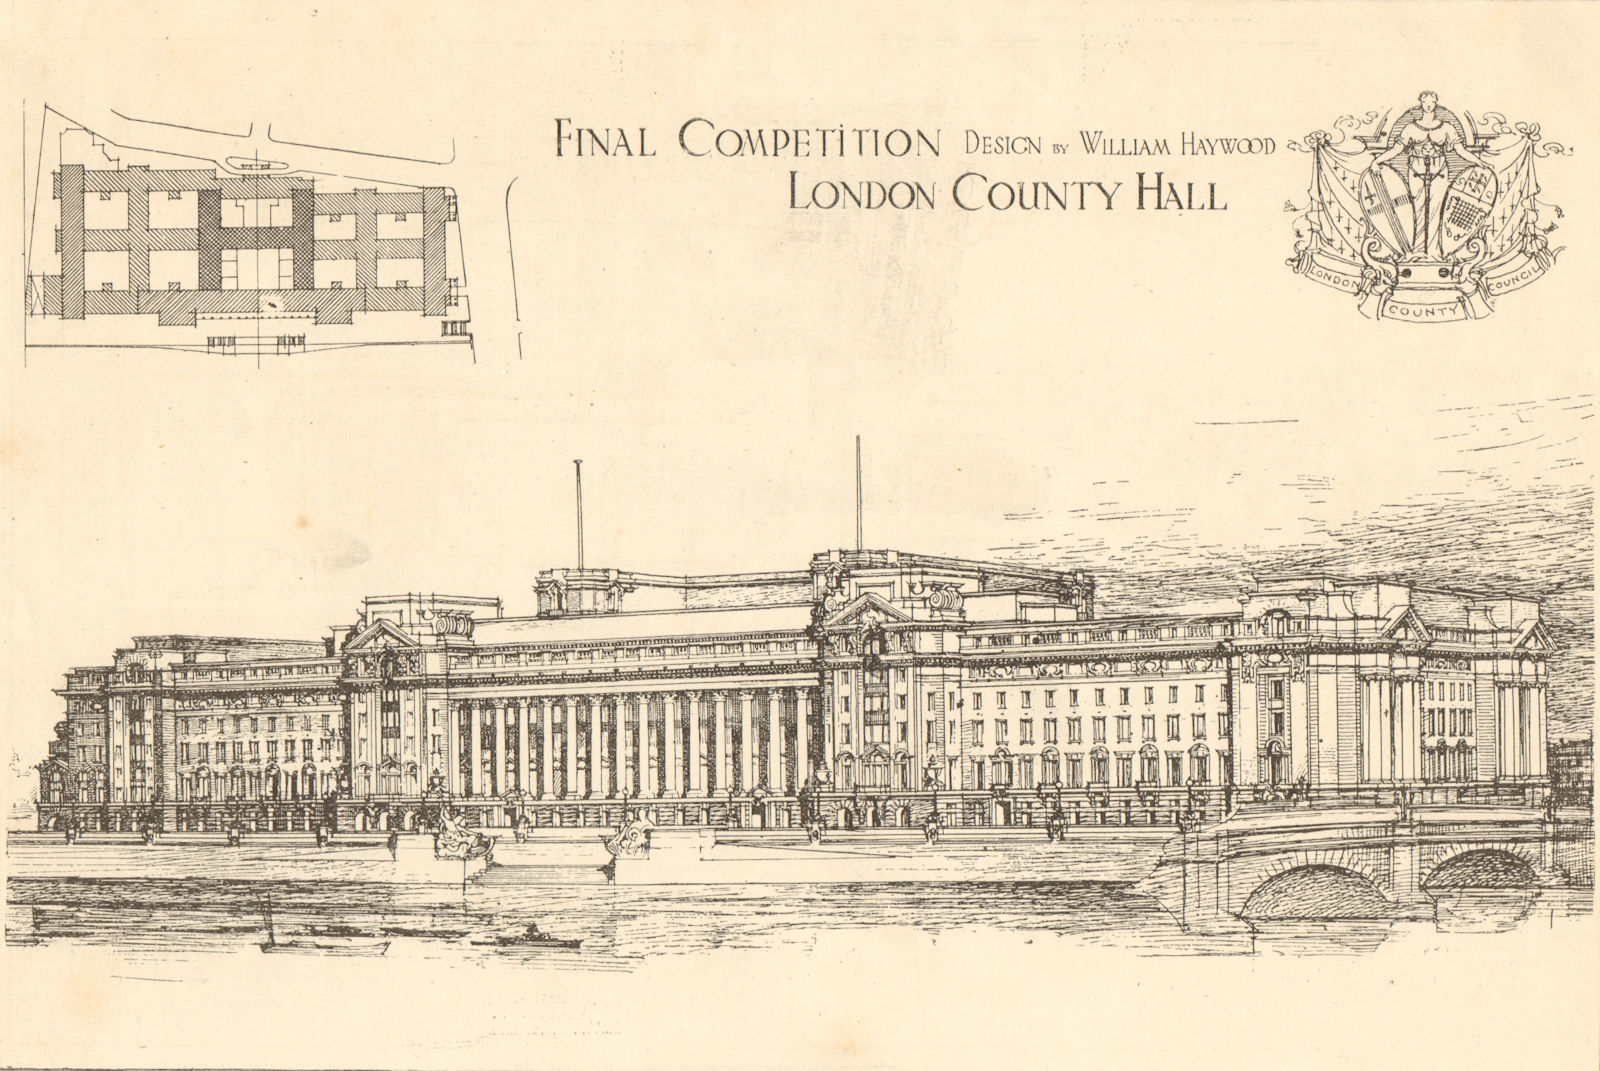 Final competition design by William Haywood, London County Hall 1908 old print